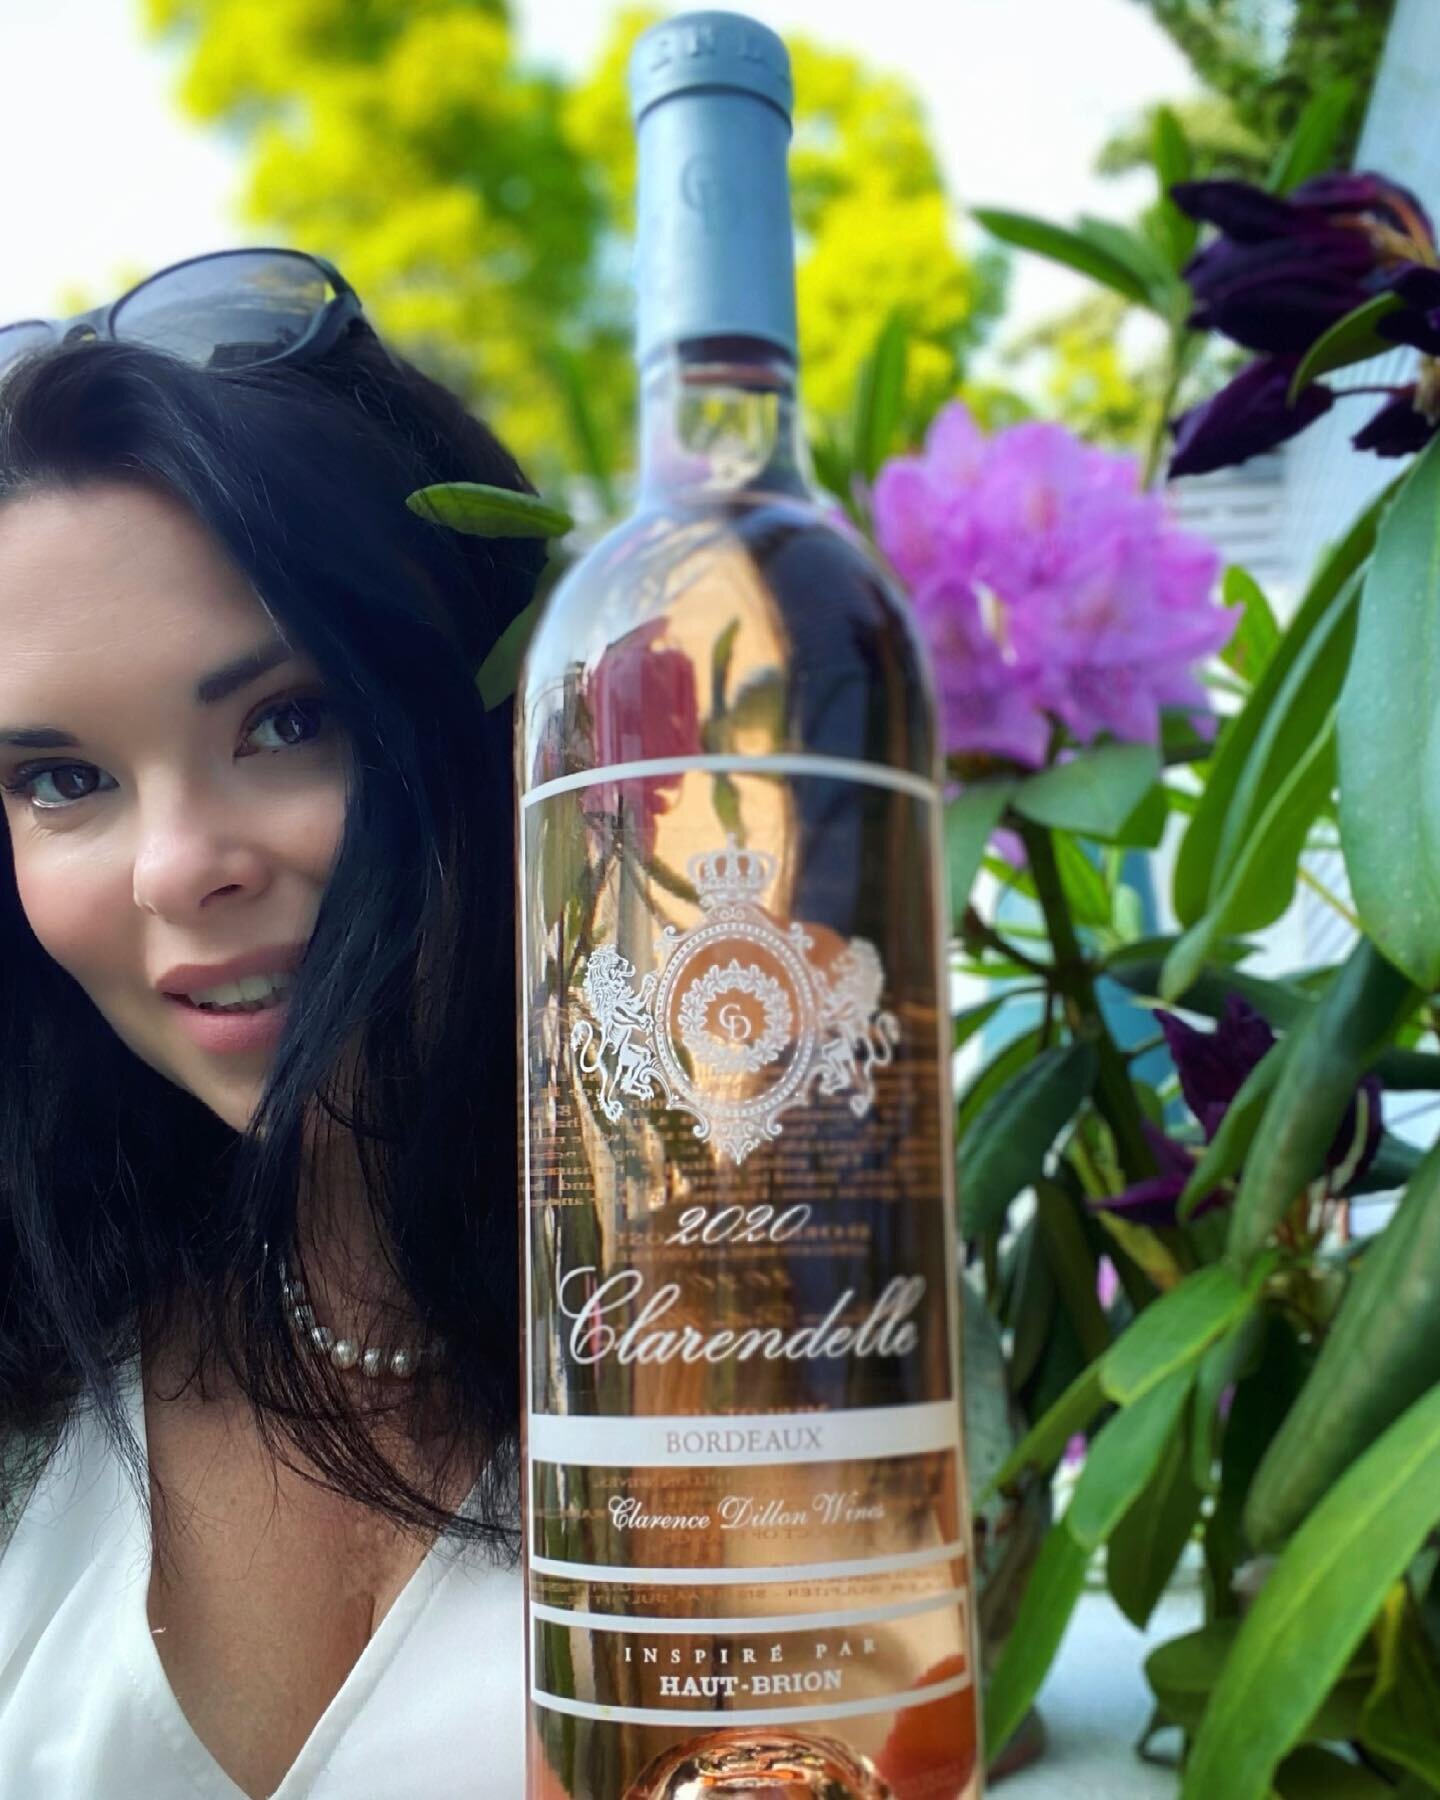 ☀️Summer is here and I am celebrating with this exquisite #Bordeaux ros&eacute; inspired by the legendary @chateauhautbrion_ - one of Bordeaux&rsquo;s elite top 5 &ldquo;First Growth&rdquo; estates and overseen by the same winemaking team.

👑 Prince